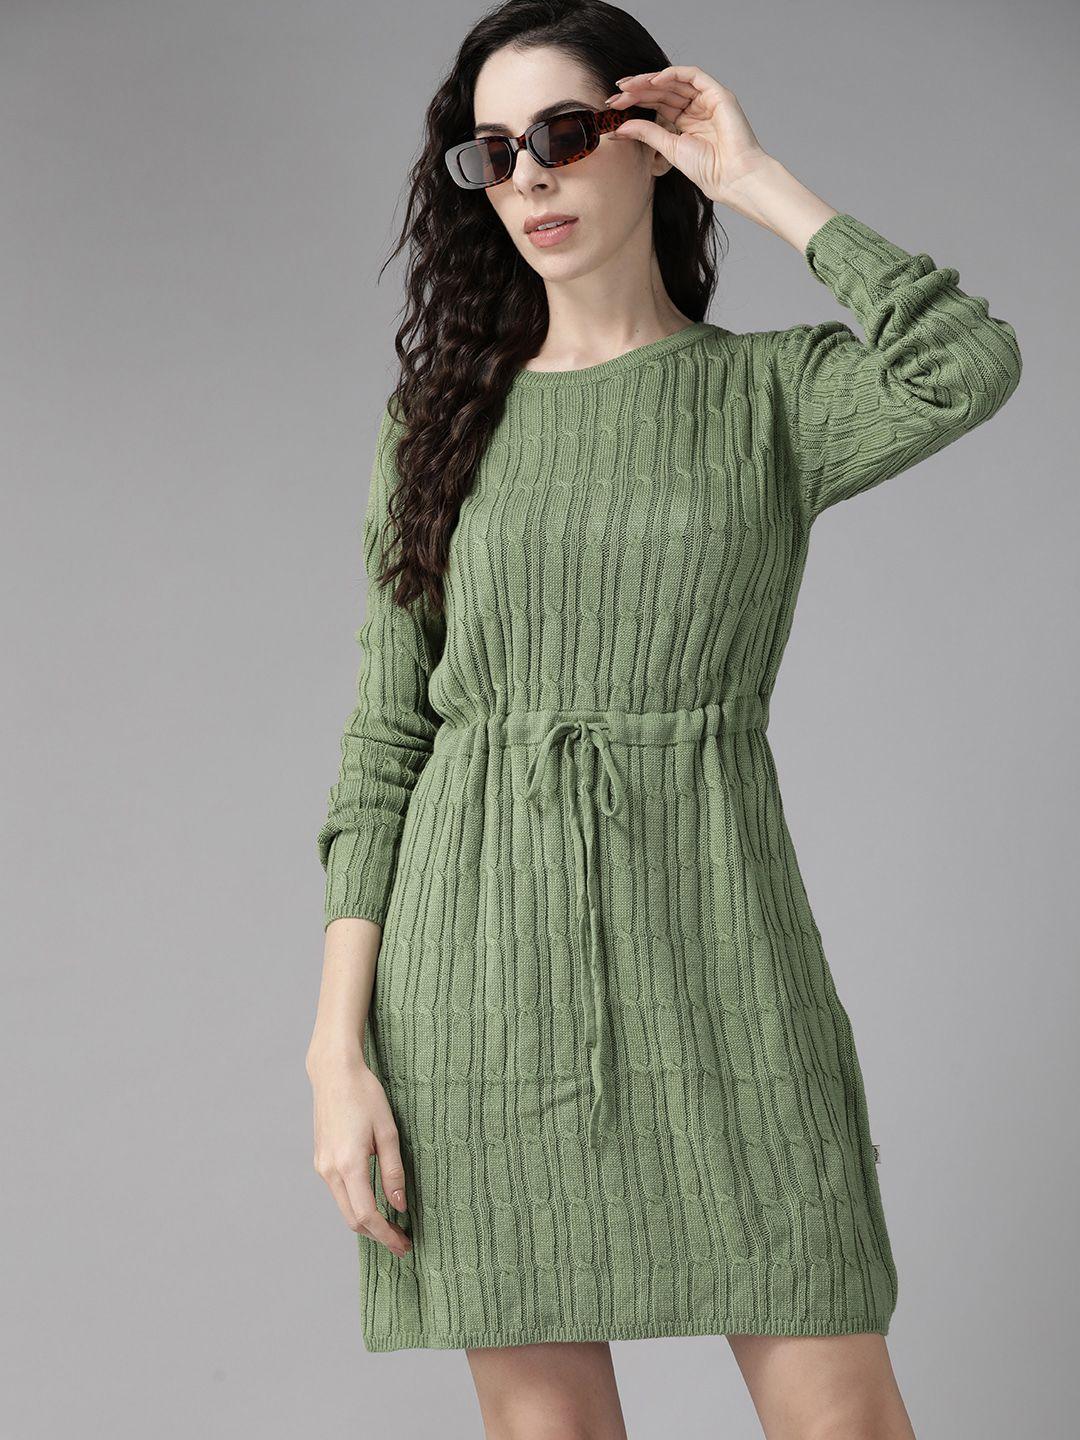 the roadster lifestyle co. women olive green cable knit acrylic jumper dress